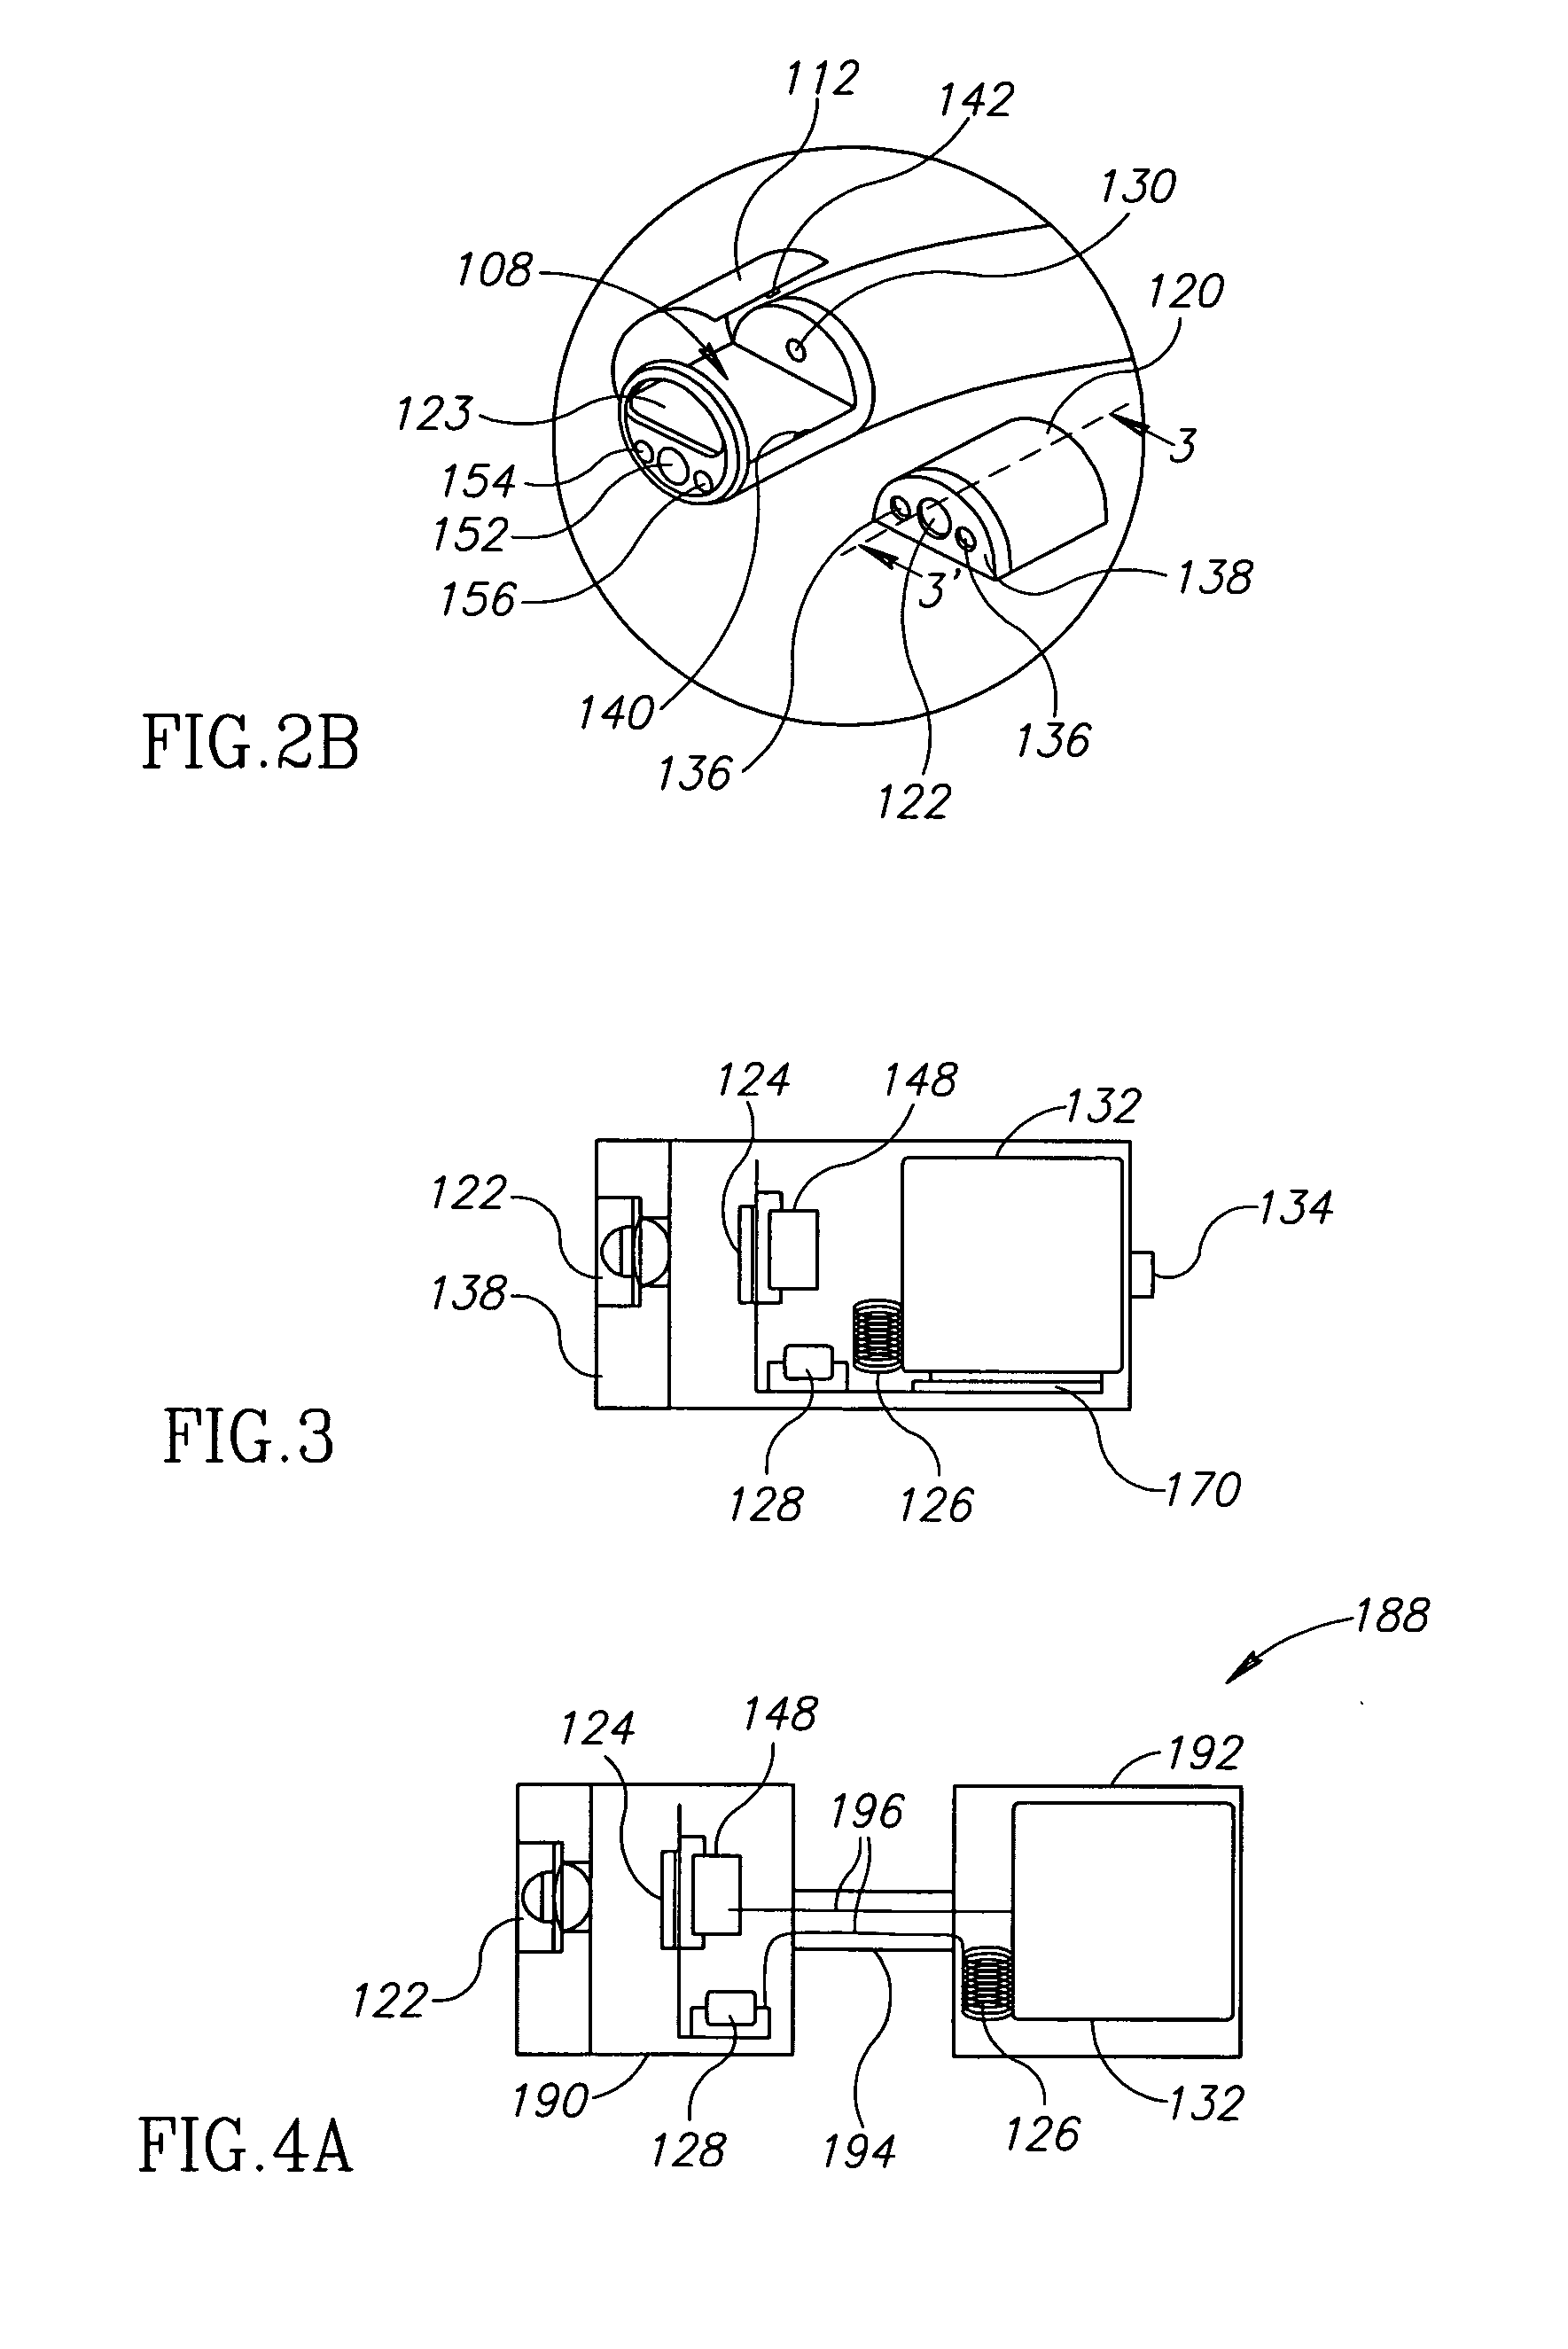 Endoscope With Imaging Capsule